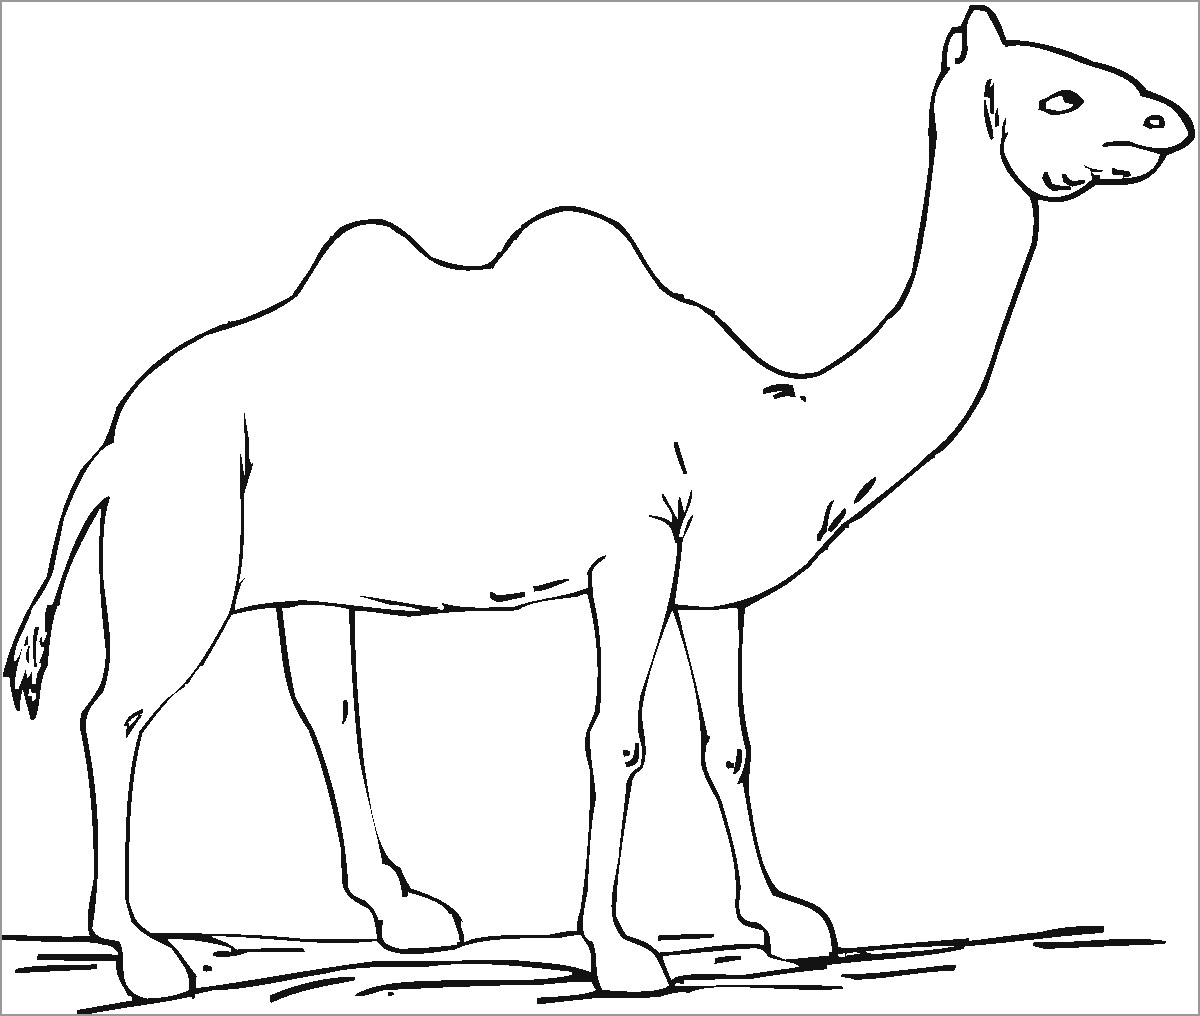 Camel Desert Coloring Page for Kids